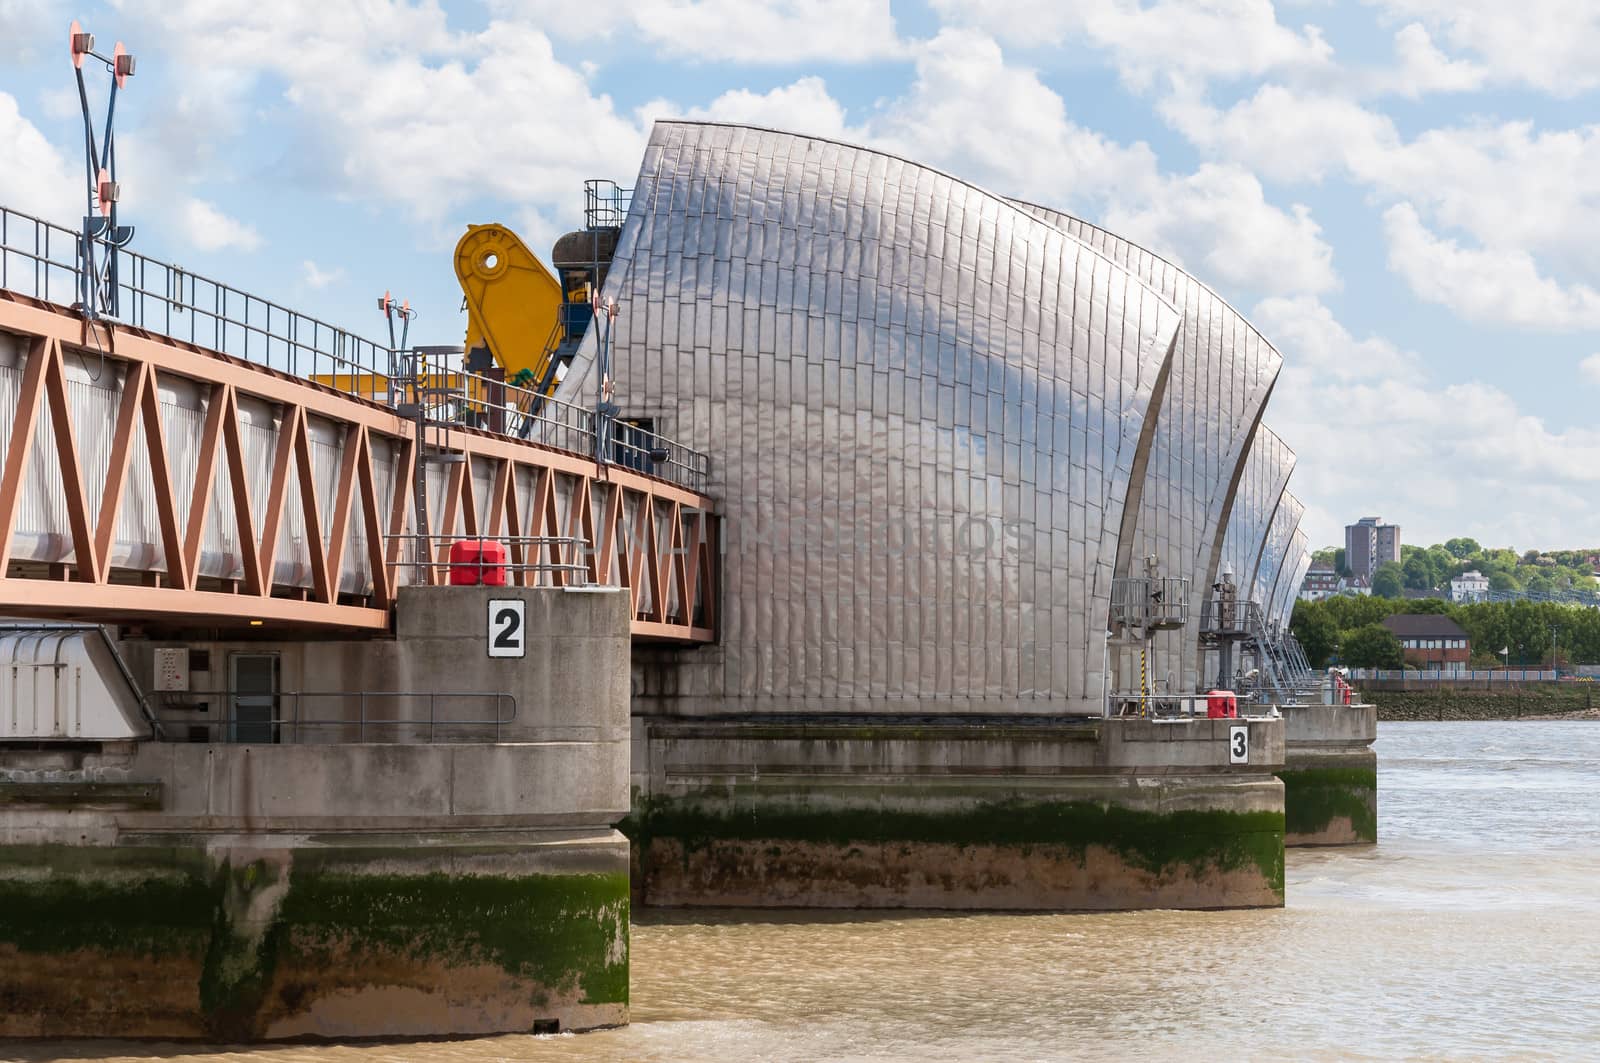 Thames Barrier in London by mkos83